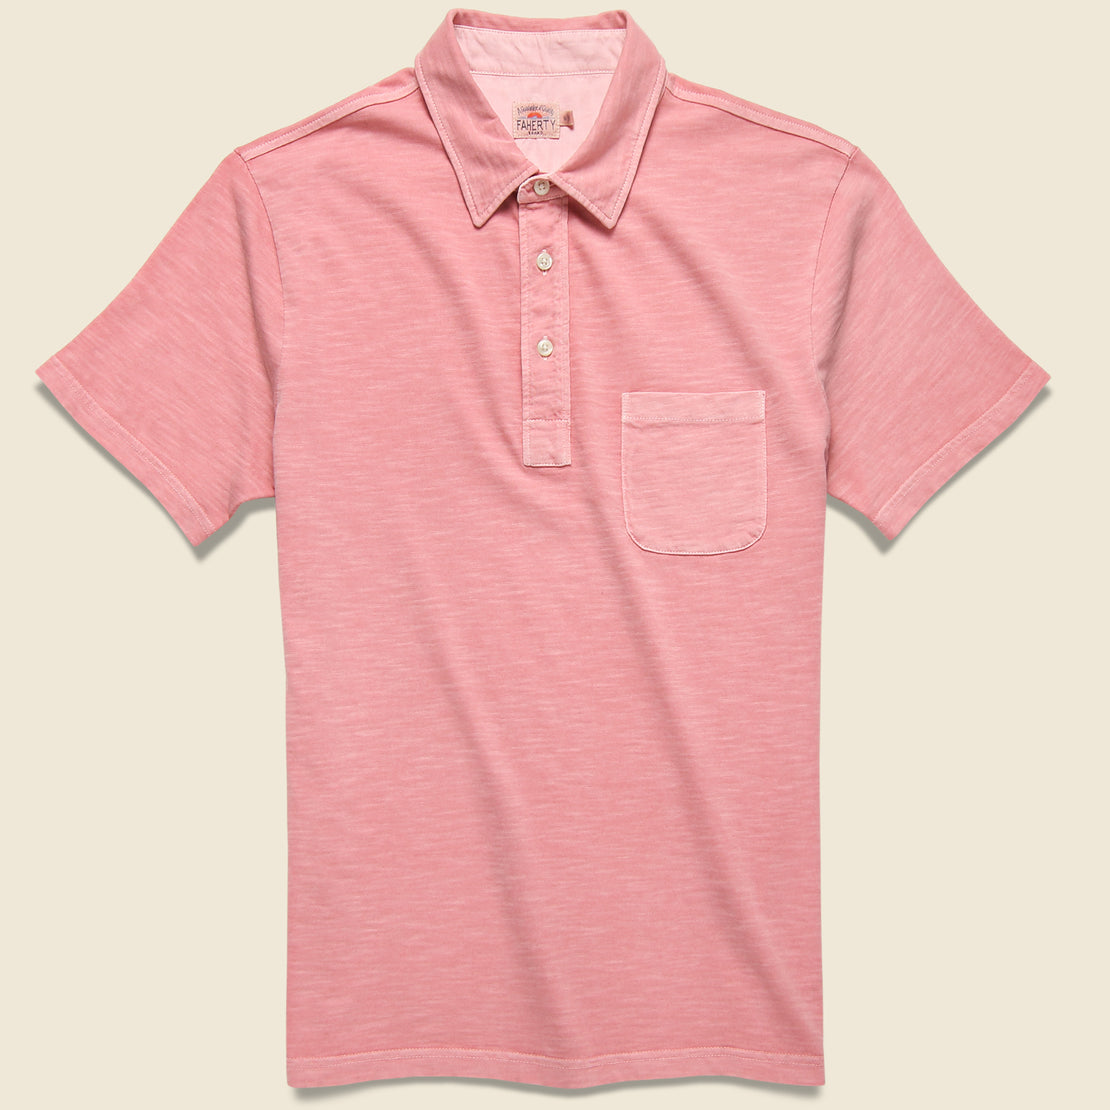 Faherty Garment Dyed Polo Shirt - Rose